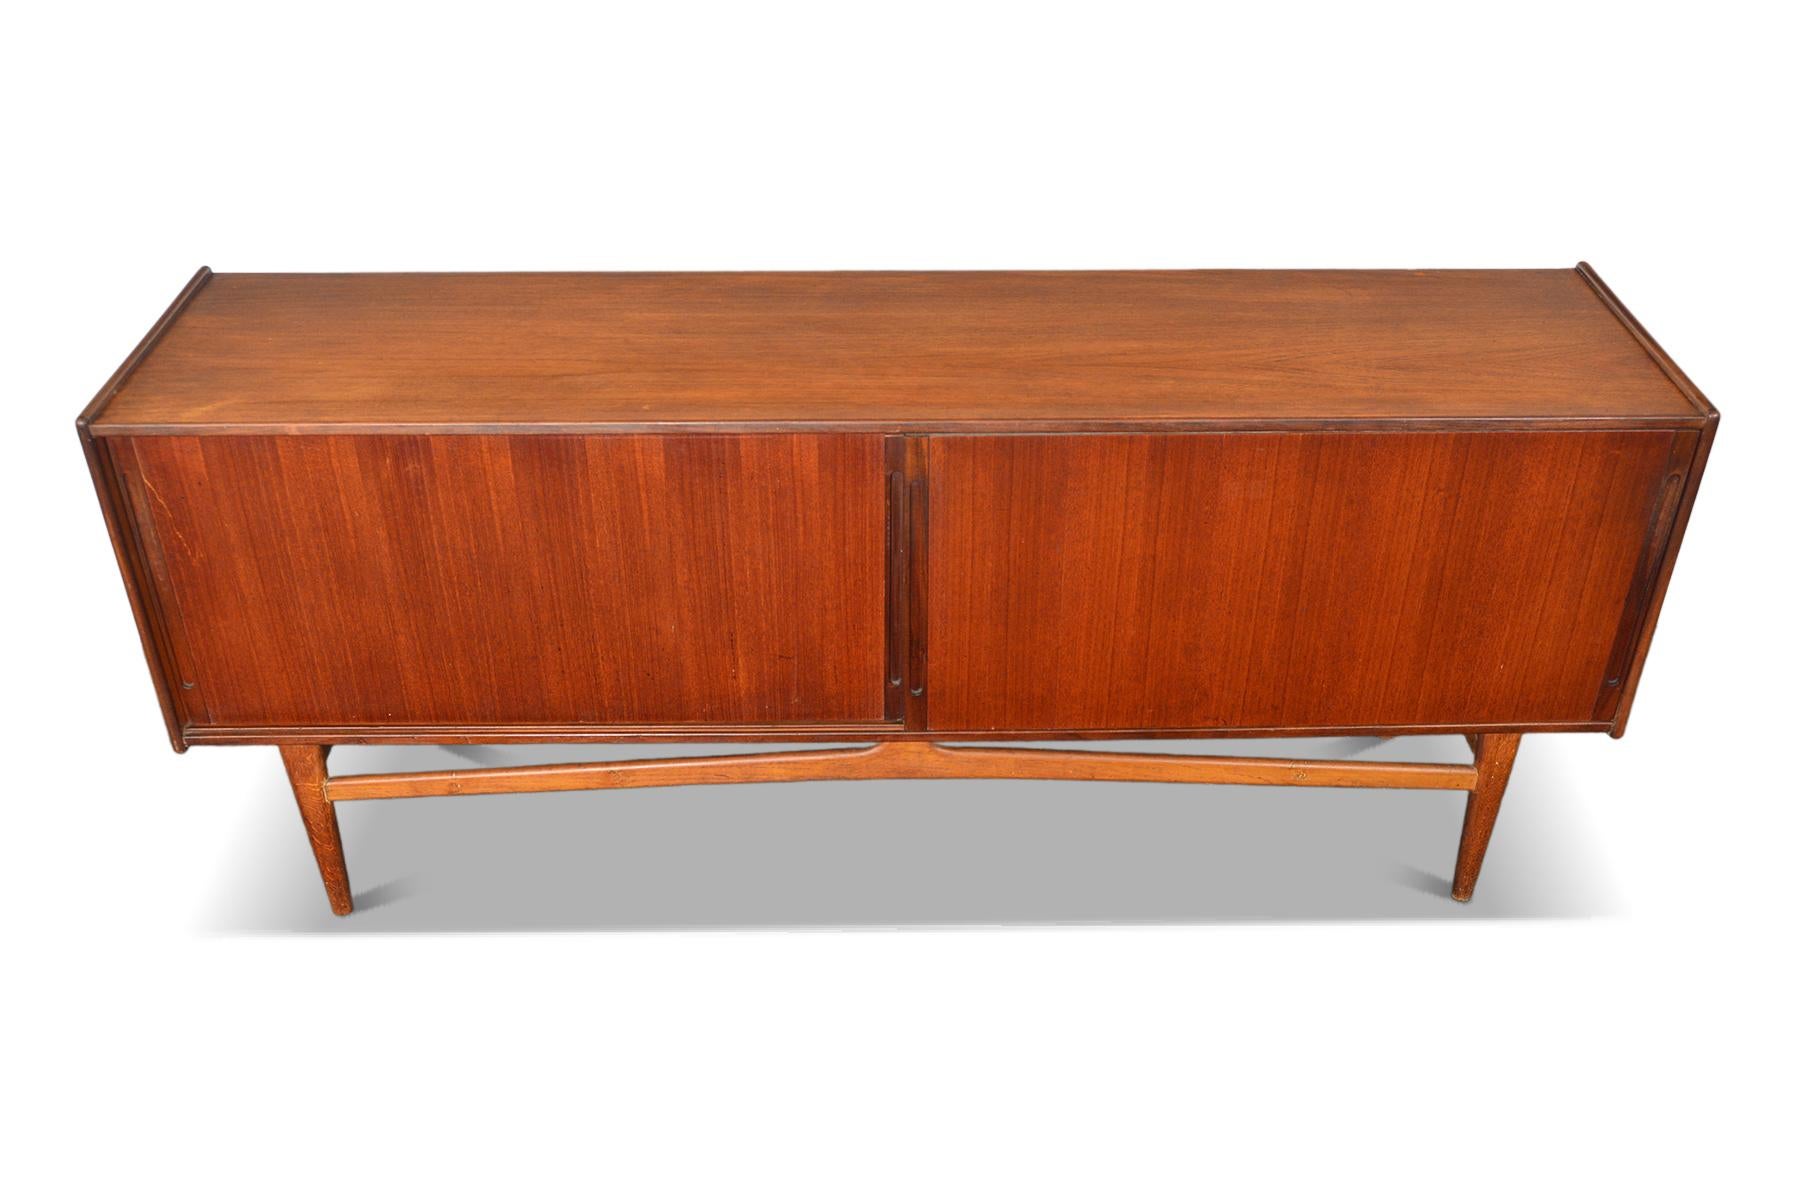 20th Century Danish Modern Two Door Sliding Credenza With Floating Oak Base For Sale